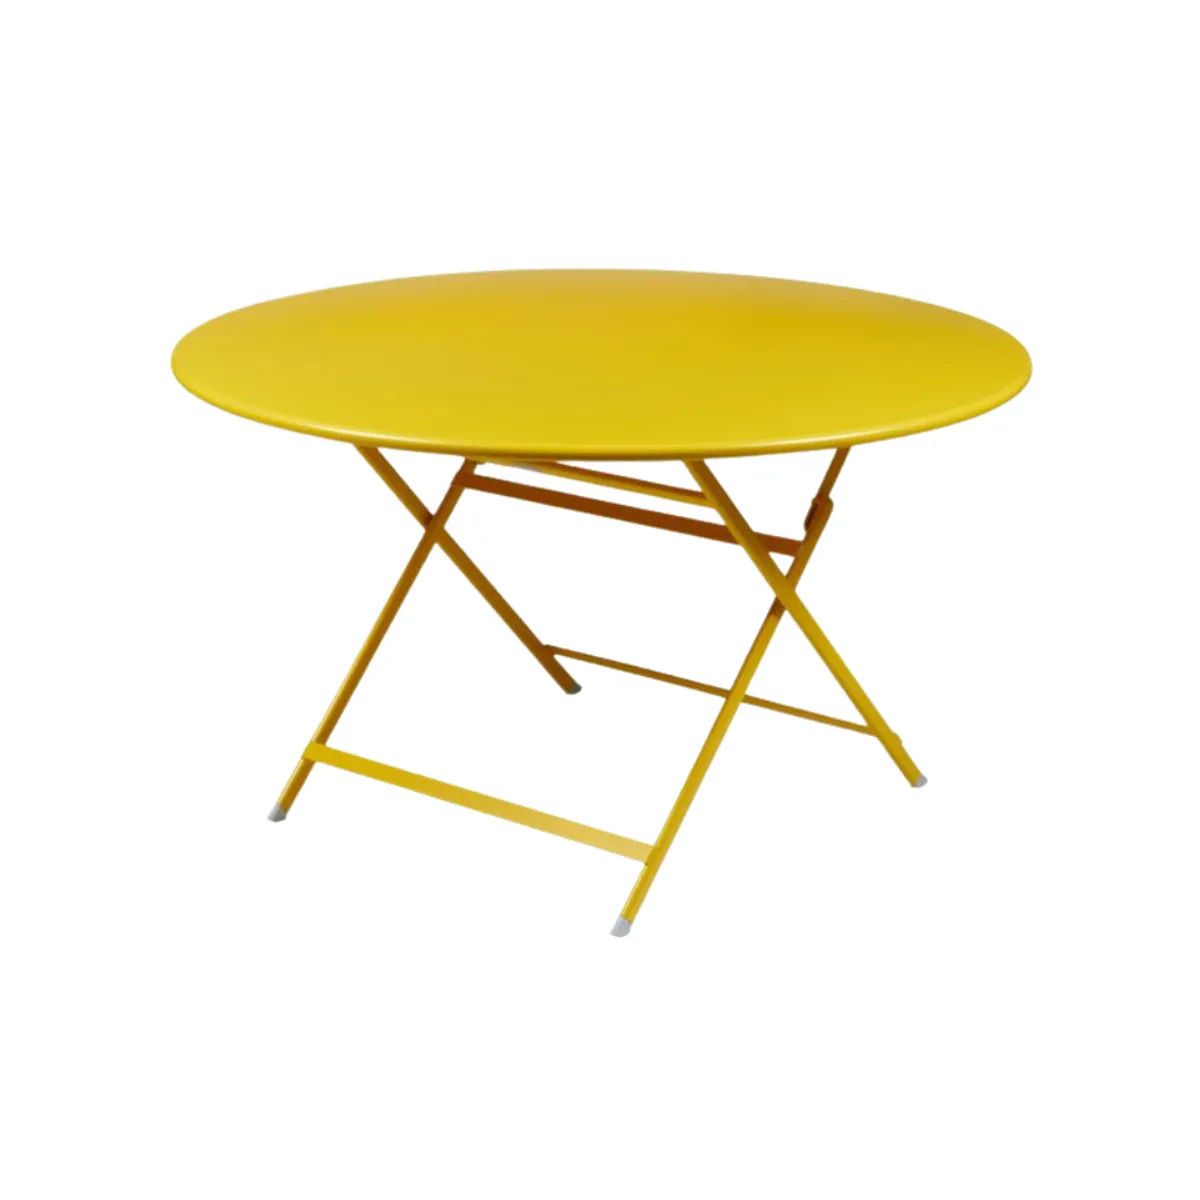 Caractere round folding table 5